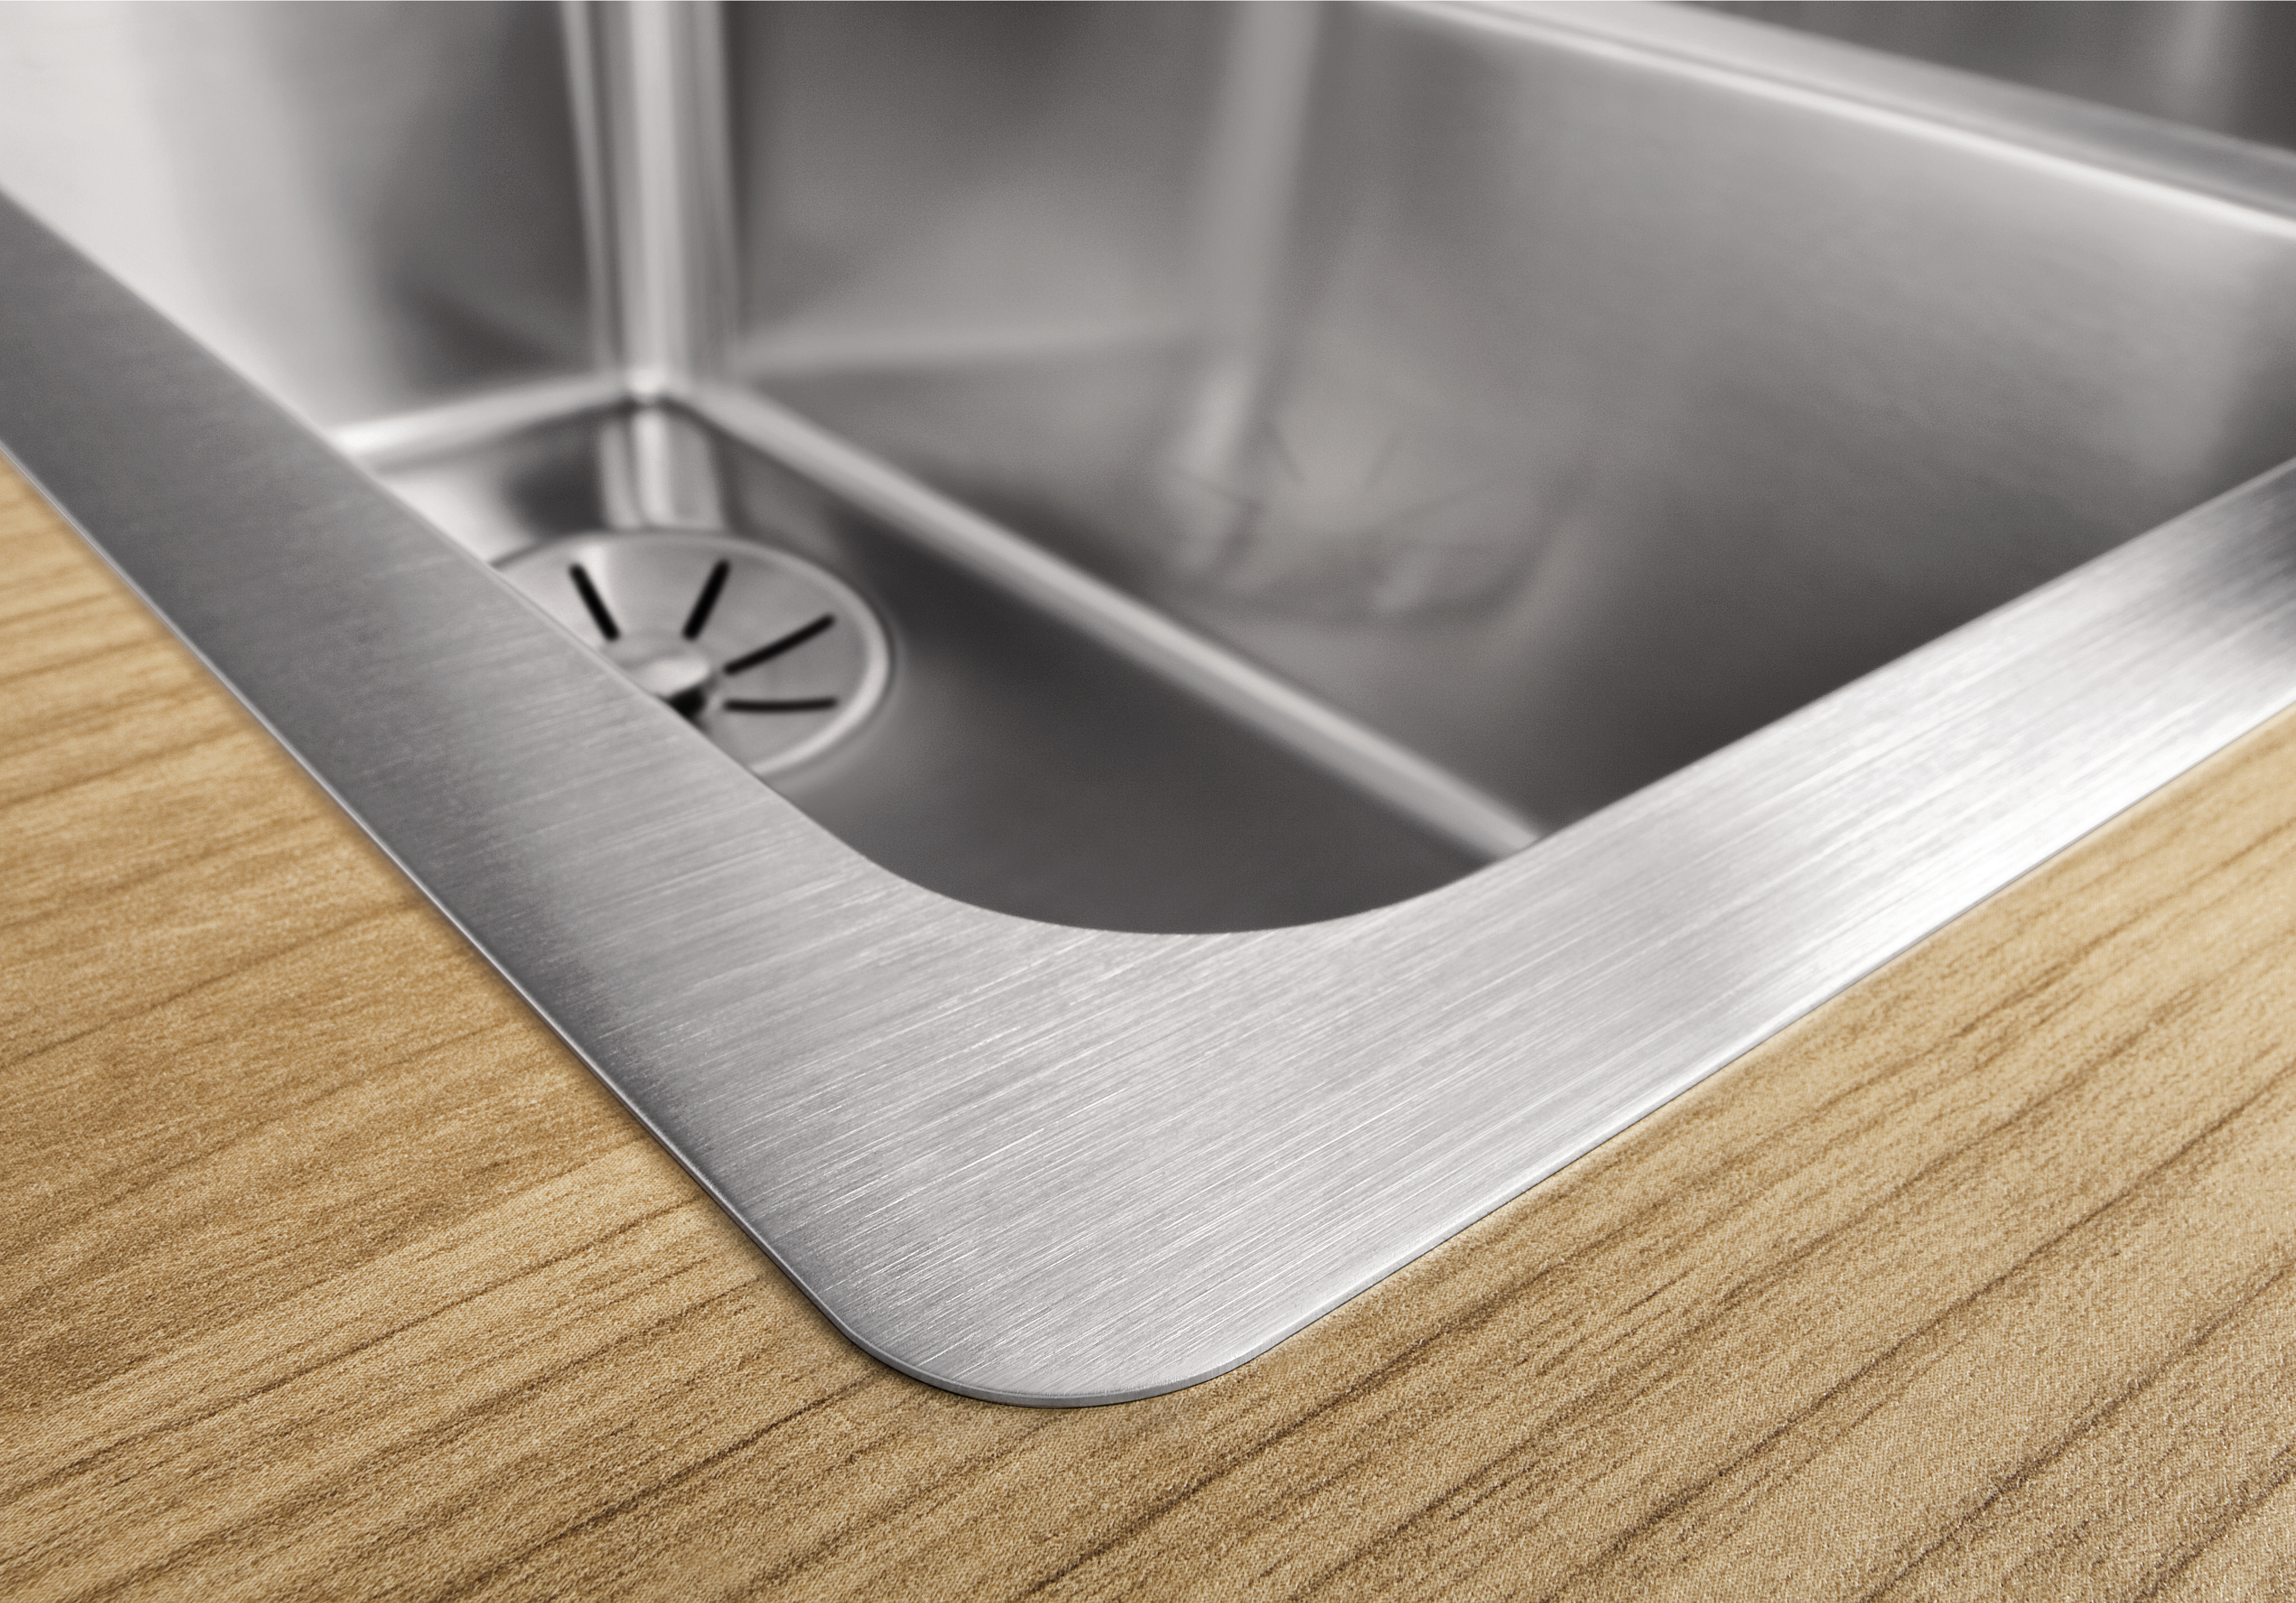 easy-to-handle inset sink